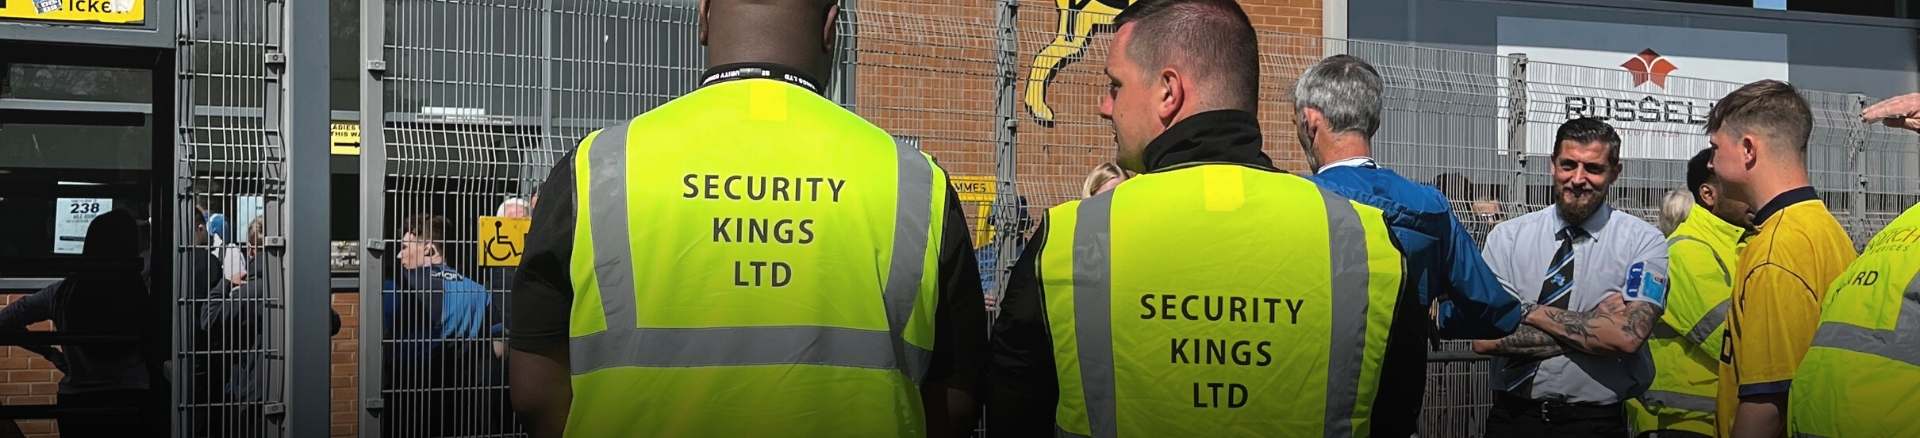 Security Derby guards events header 2